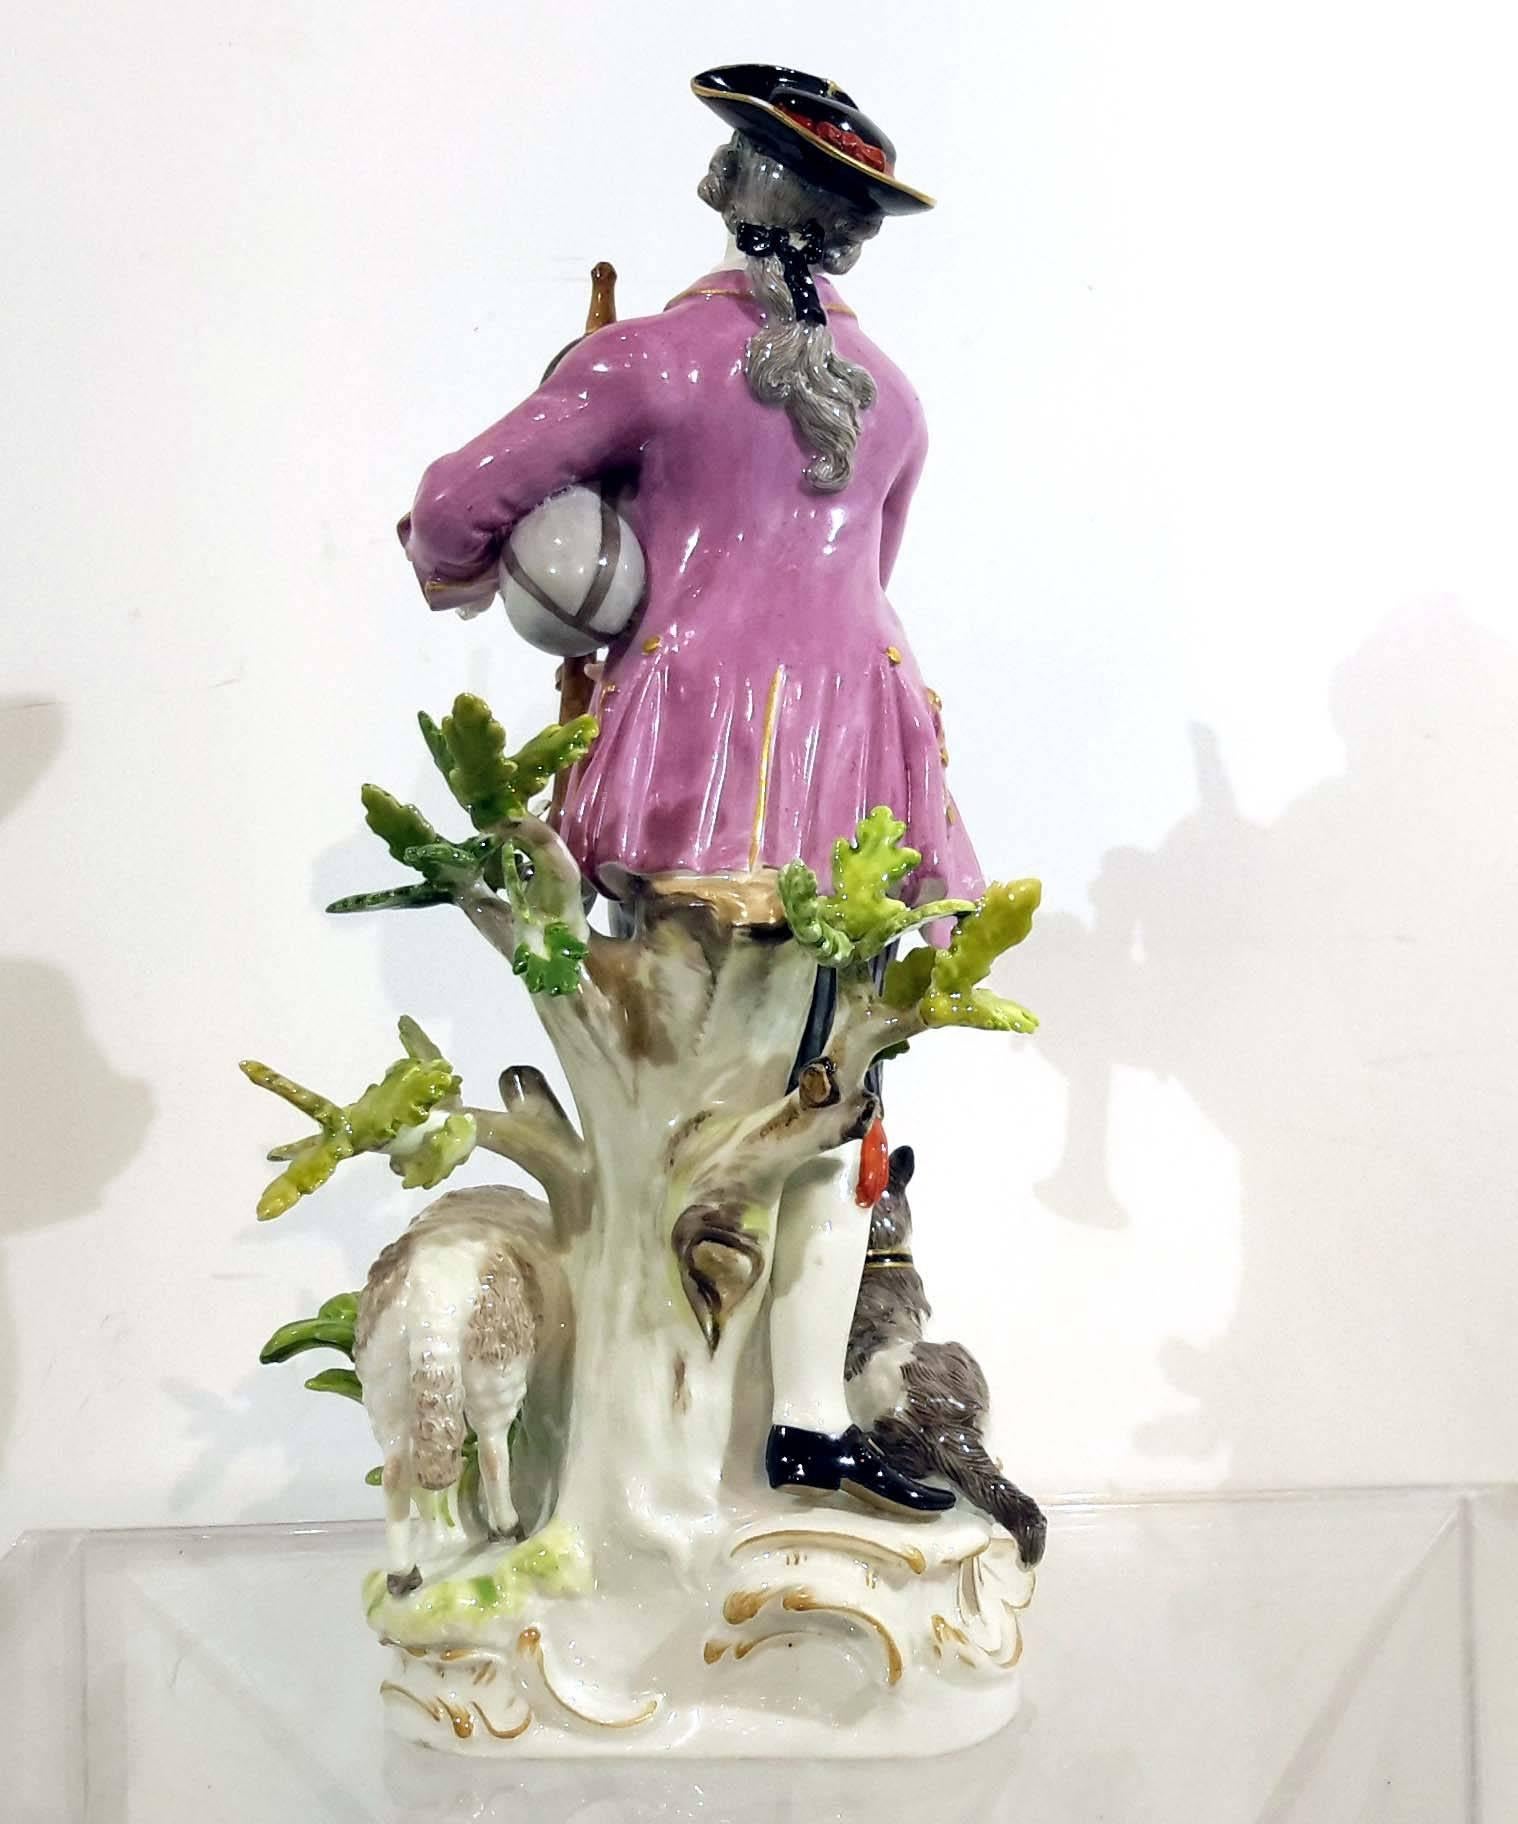 Baroque Revival Meissen Porcelain Group of Shepherd with Bagpipe, 19th Century